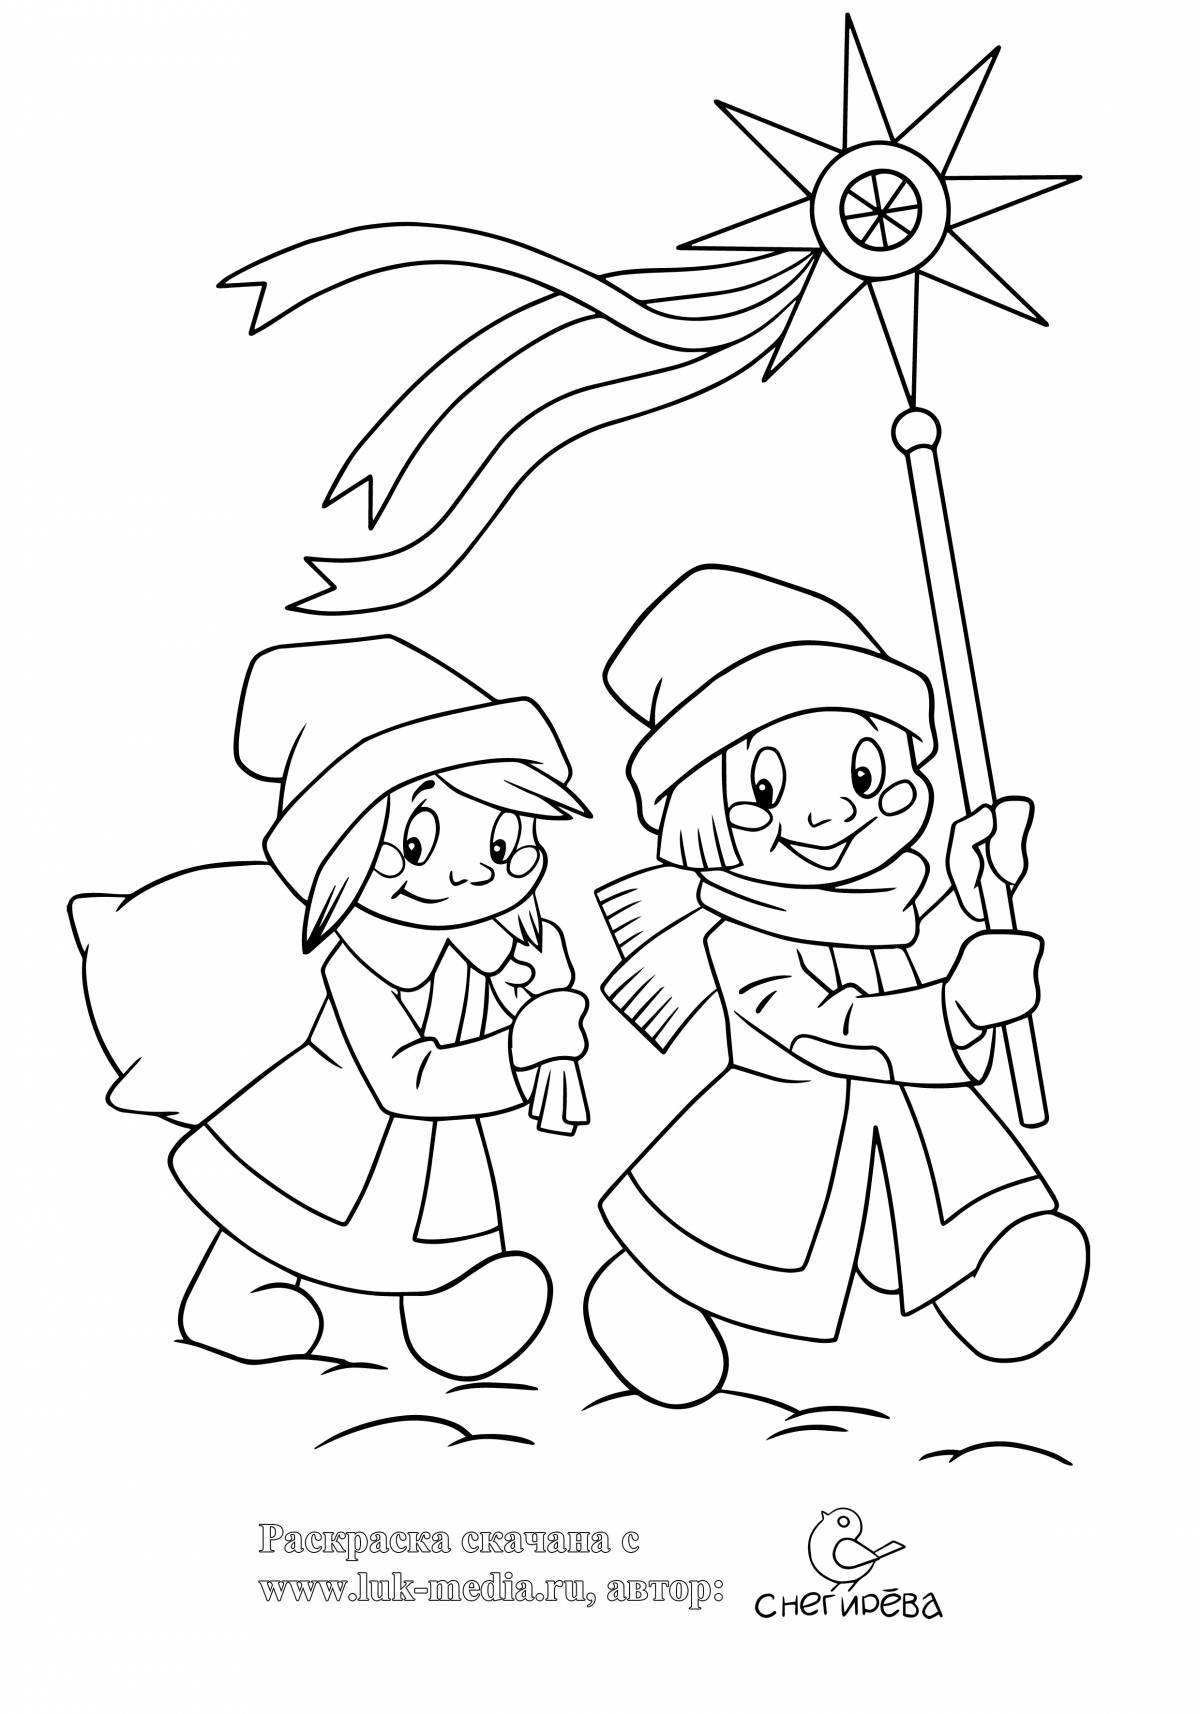 Exquisite carol coloring pages for preschoolers